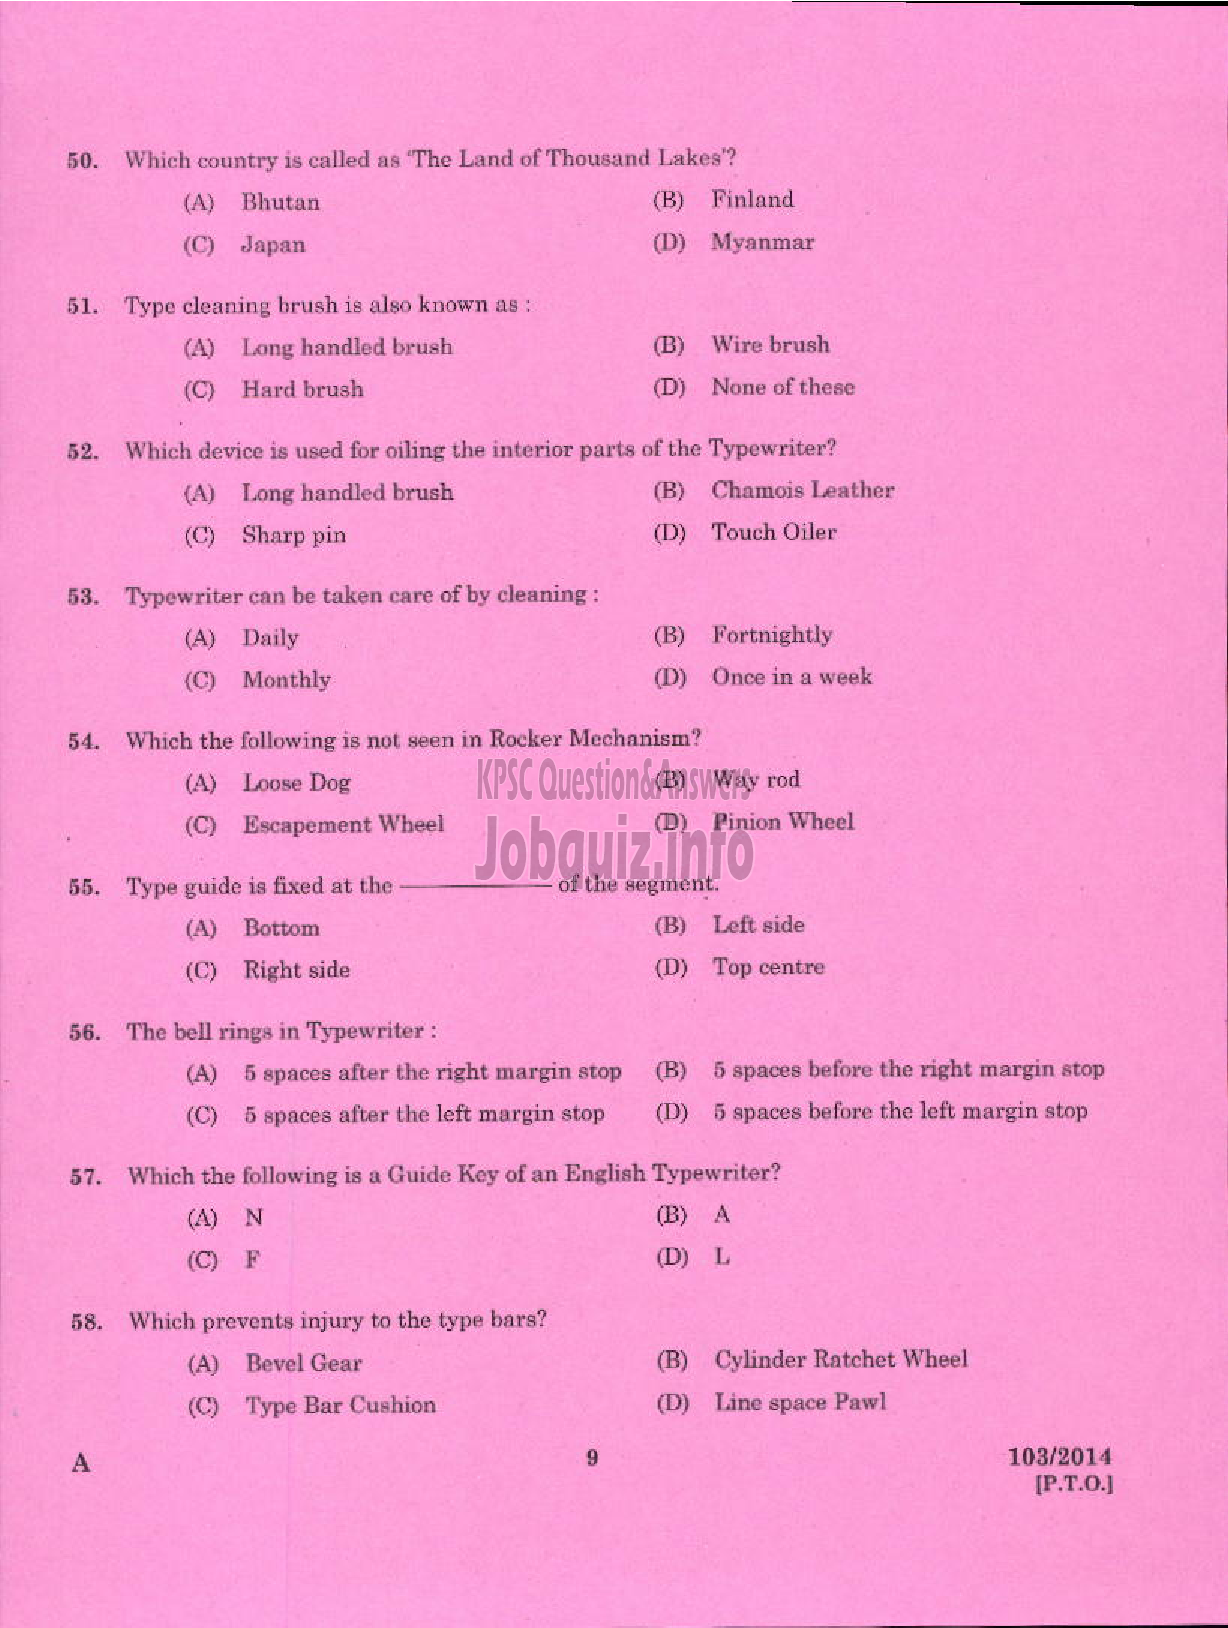 Kerala PSC Question Paper - STENOGRAPHER GRADE IV STEEL AND INDUSTRIAL FORGINGS LIMITED-7